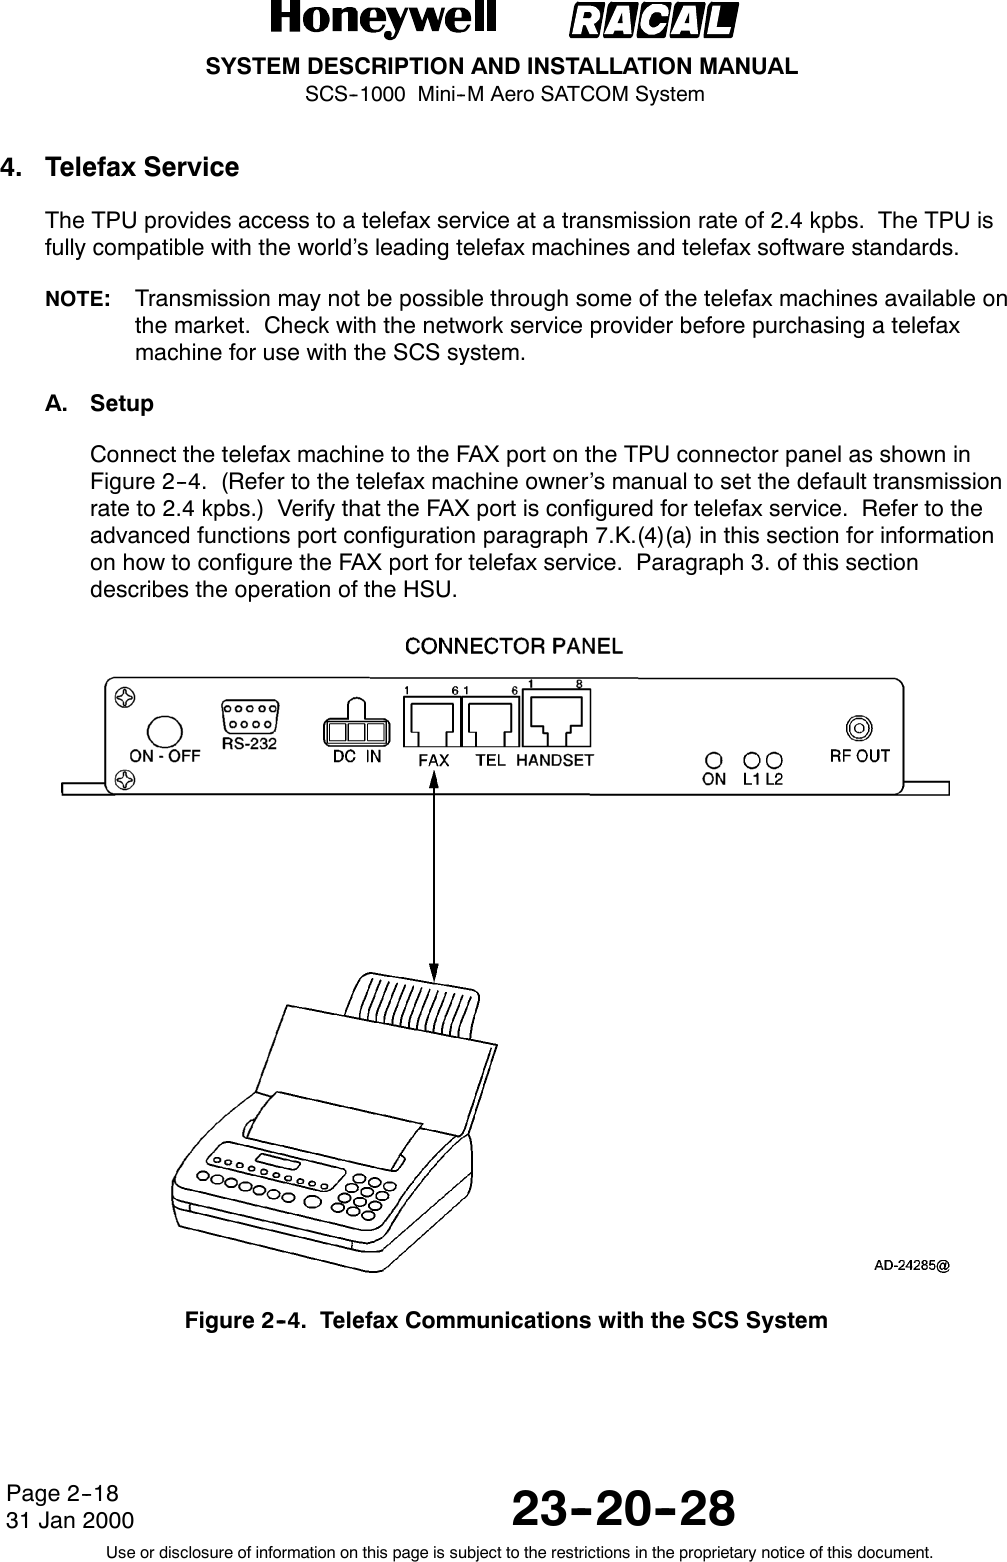 SYSTEM DESCRIPTION AND INSTALLATION MANUALSCS--1000 Mini--M Aero SATCOM System23--20--28Use or disclosure of information on this page is subject to the restrictions in the proprietary notice of this document.Page 2--1831 Jan 20004. Telefax ServiceThe TPU provides access to a telefax service at a transmission rate of 2.4 kpbs. The TPU isfully compatible with the world’s leading telefax machines and telefax software standards.NOTE:Transmission may not be possible through some of the telefax machines available onthe market. Check with the network service provider before purchasing a telefaxmachine for use with the SCS system.A. SetupConnect the telefax machine to the FAX port on the TPU connector panel as shown inFigure 2--4. (Refer to the telefax machine owner’s manual to set the default transmissionrate to 2.4 kpbs.) Verify that the FAX port is configured for telefax service. Refer to theadvanced functions port configuration paragraph 7.K.(4)(a) in this section for informationon how to configure the FAX port for telefax service. Paragraph 3. of this sectiondescribes the operation of the HSU.Figure 2--4. Telefax Communications with the SCS System